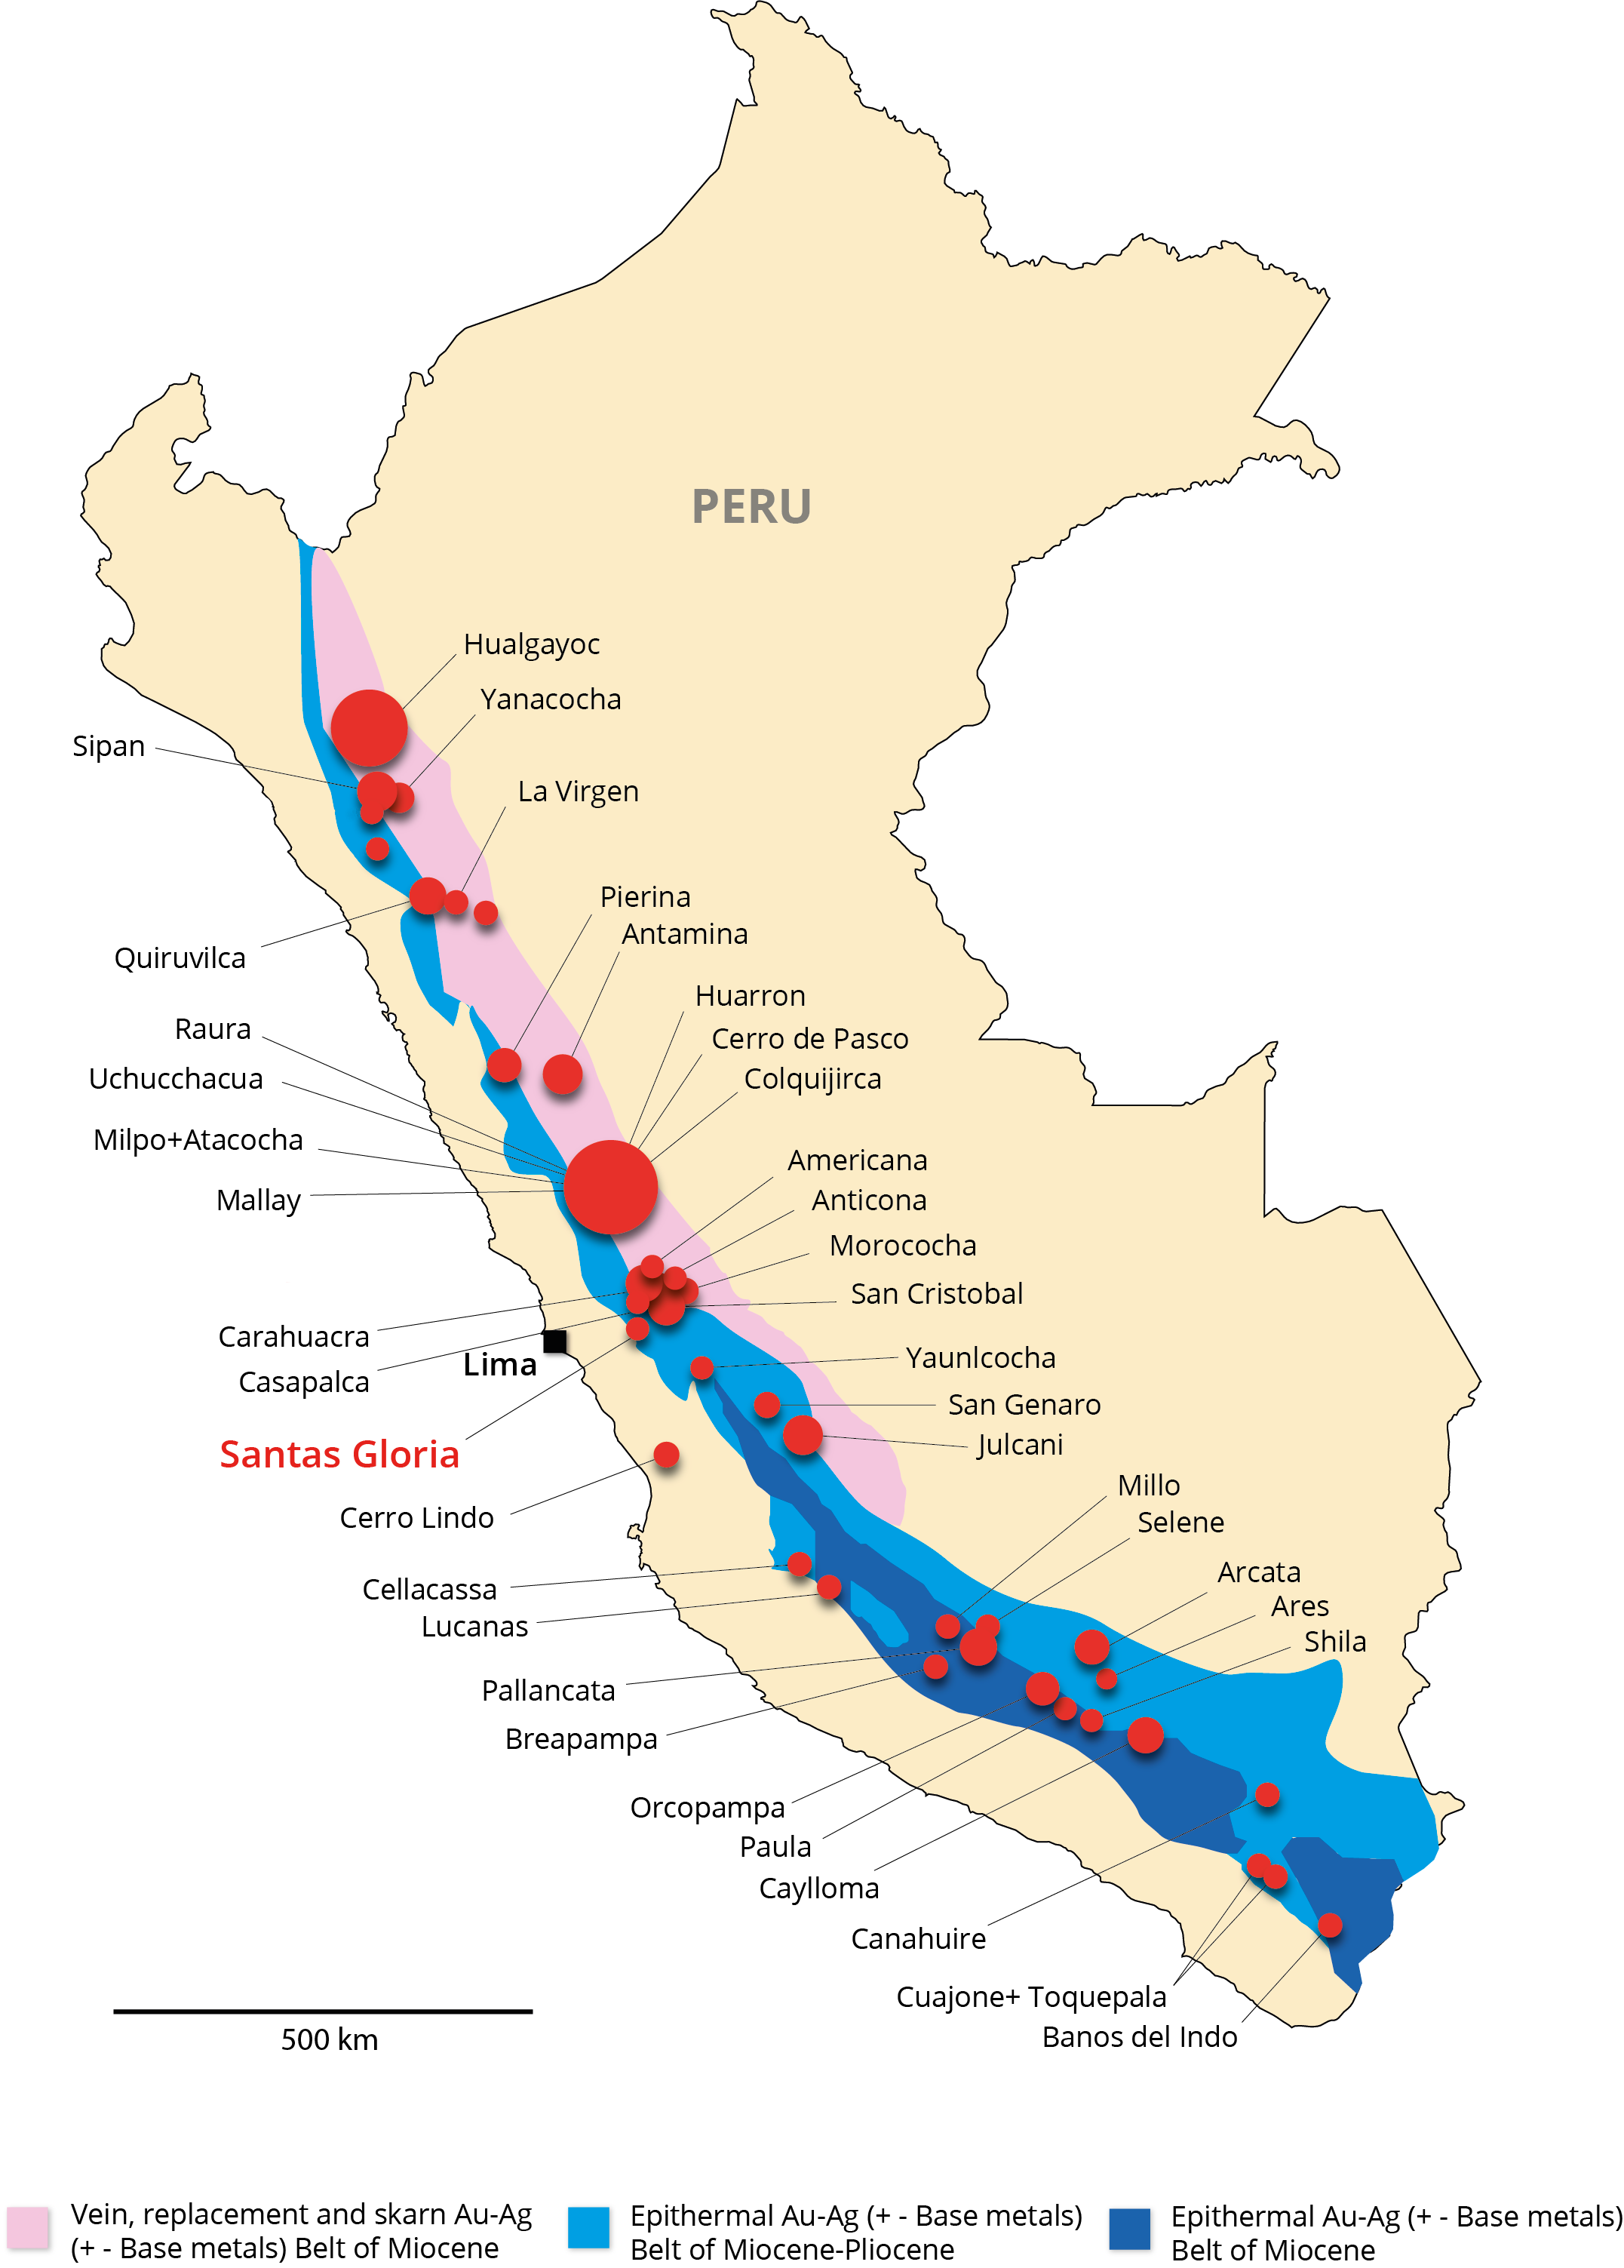 Santas Gloria and other Deposits on Peruvian Belts